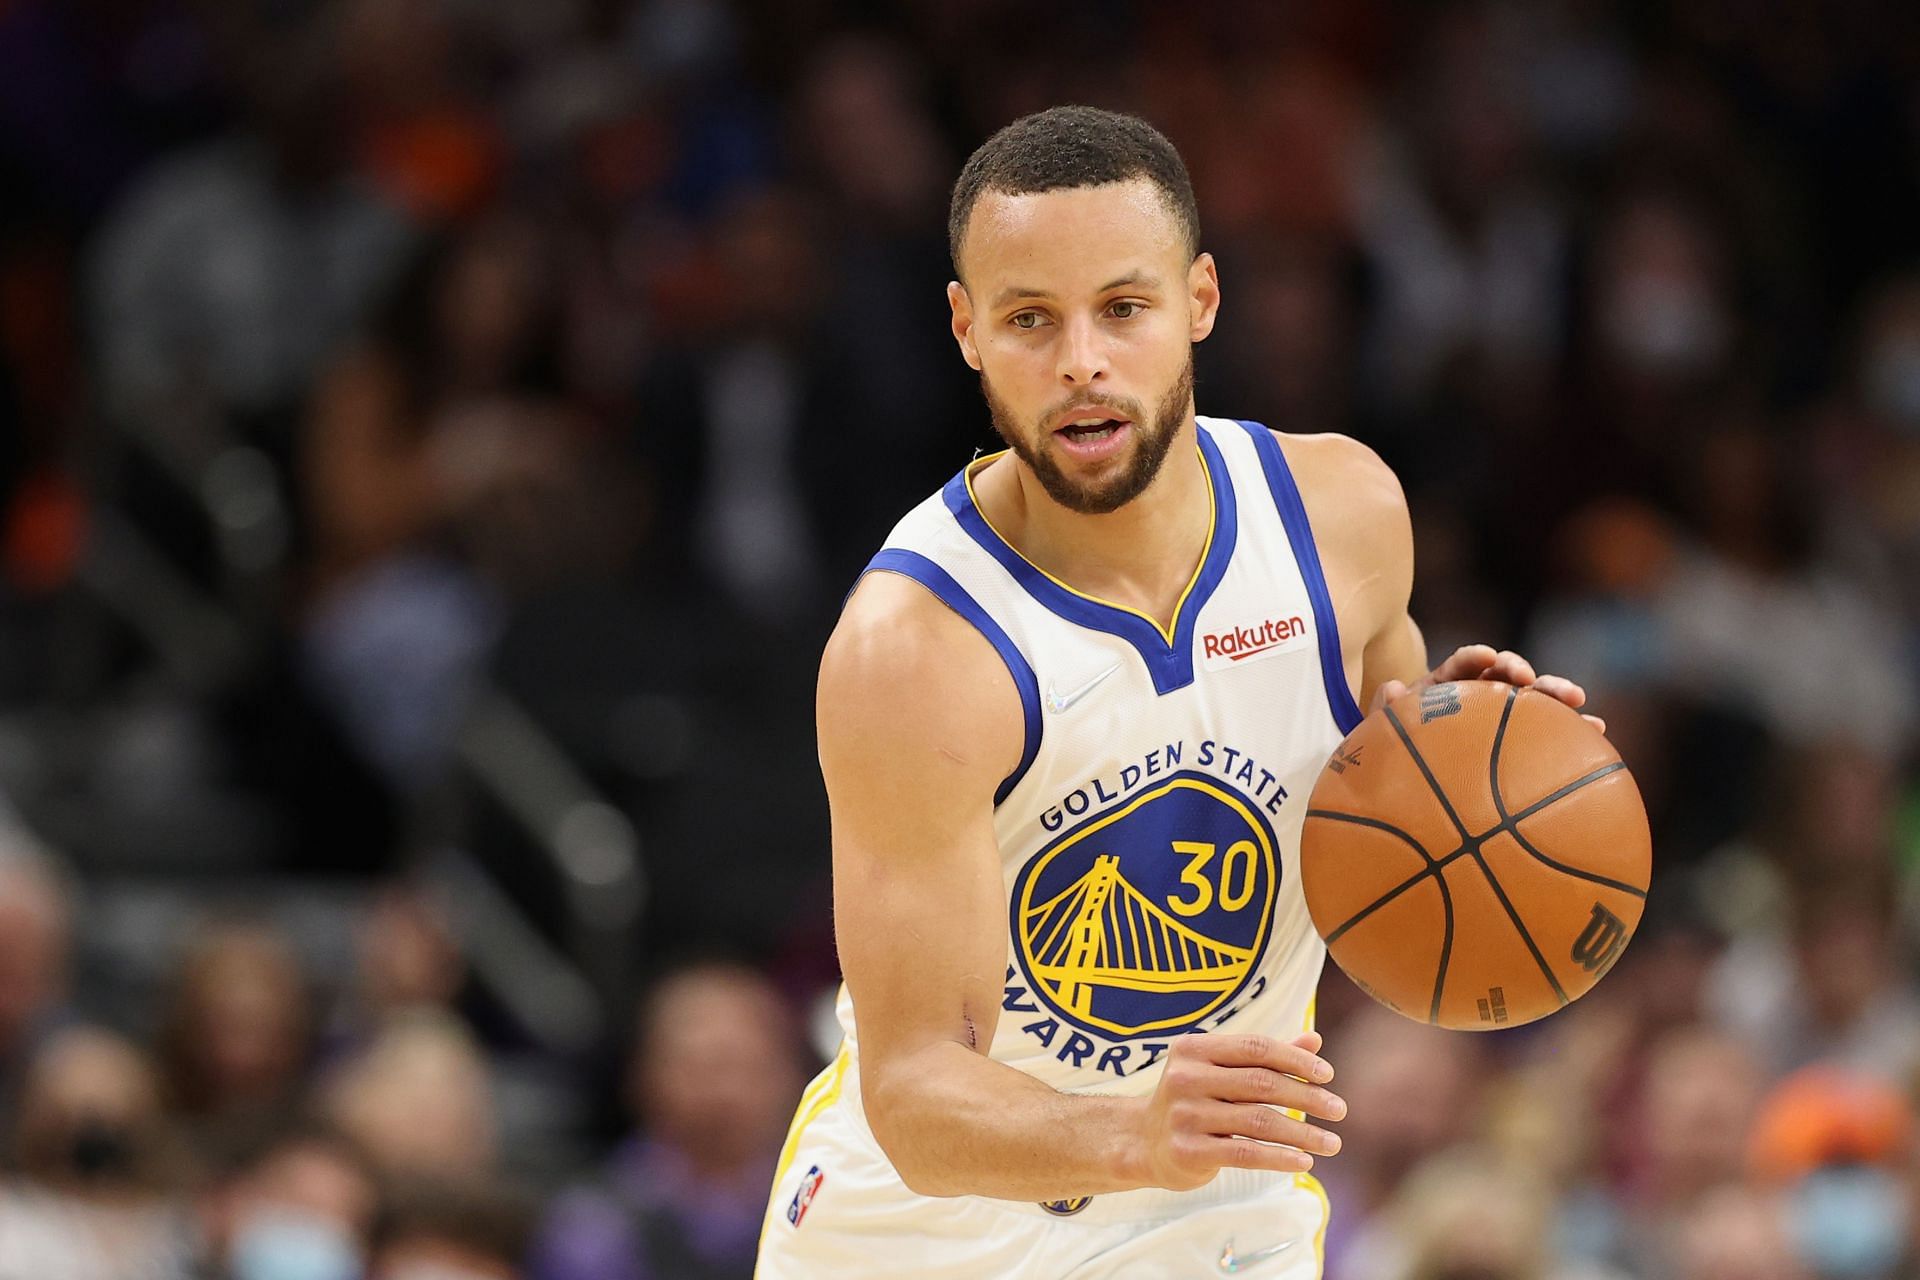 Steve Kerr believes that the Golden State Warriors and Steph Curry are primed to win a title this season.